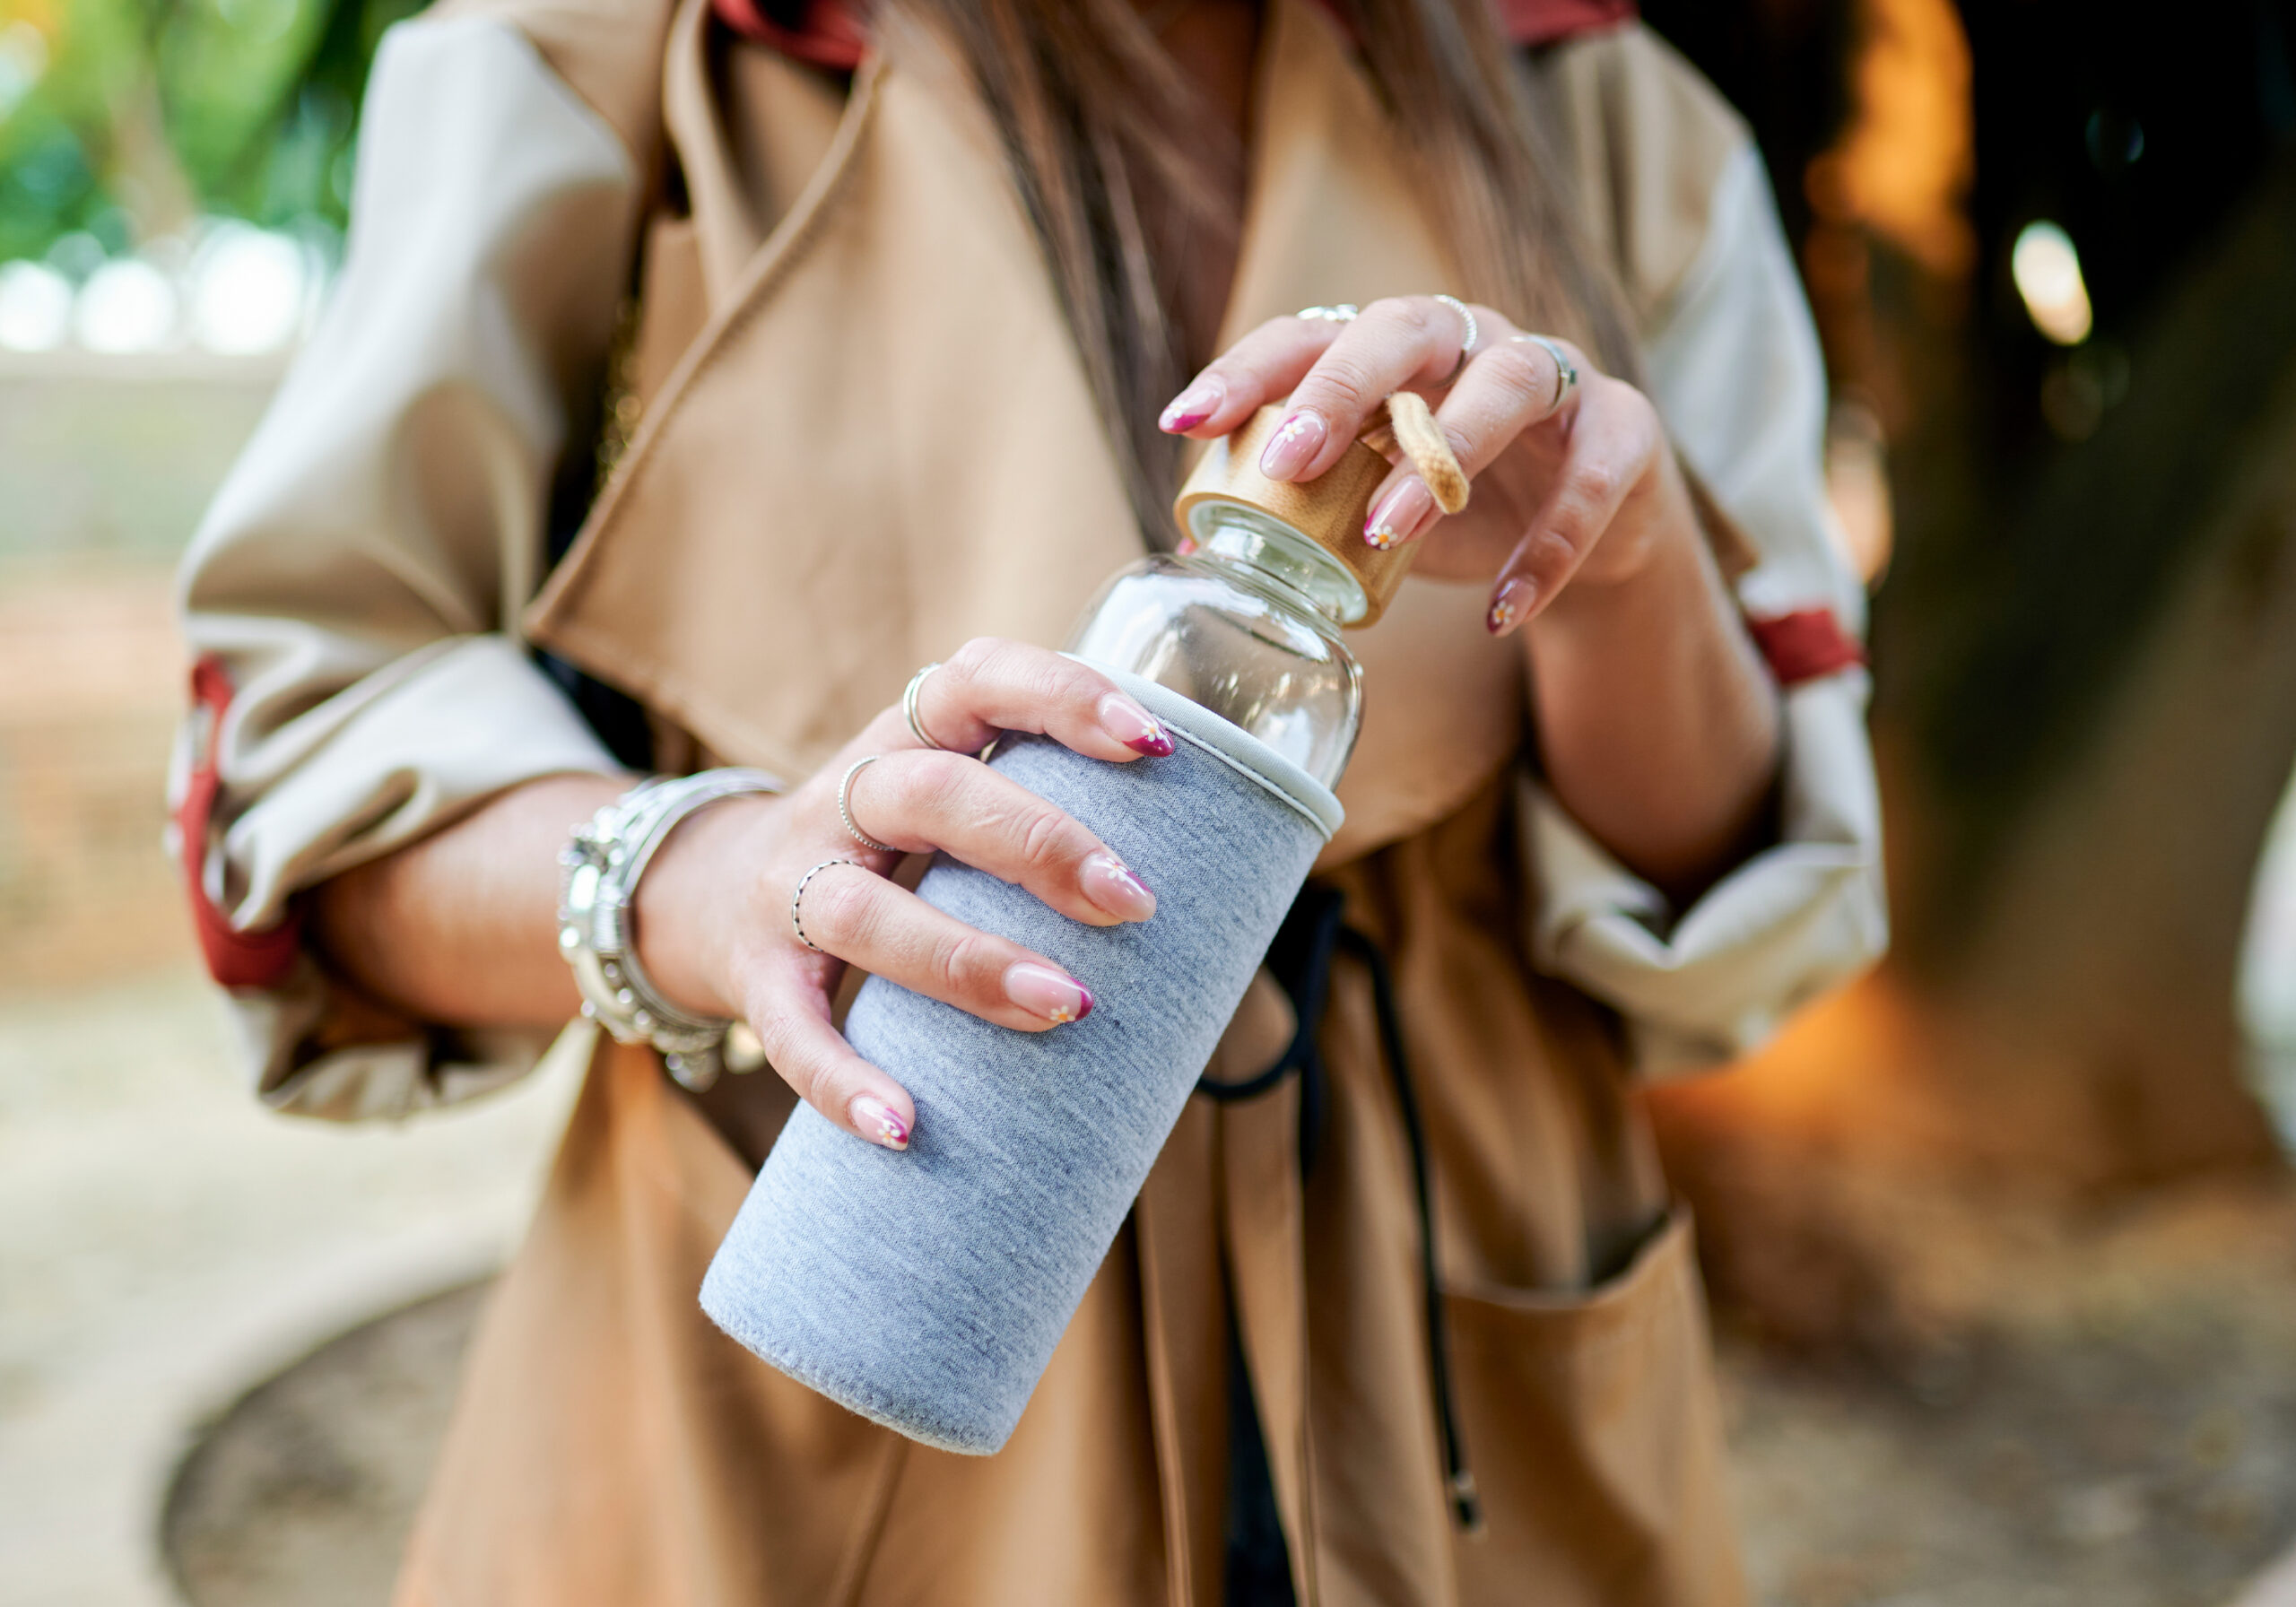 How to clean your reusable water bottle